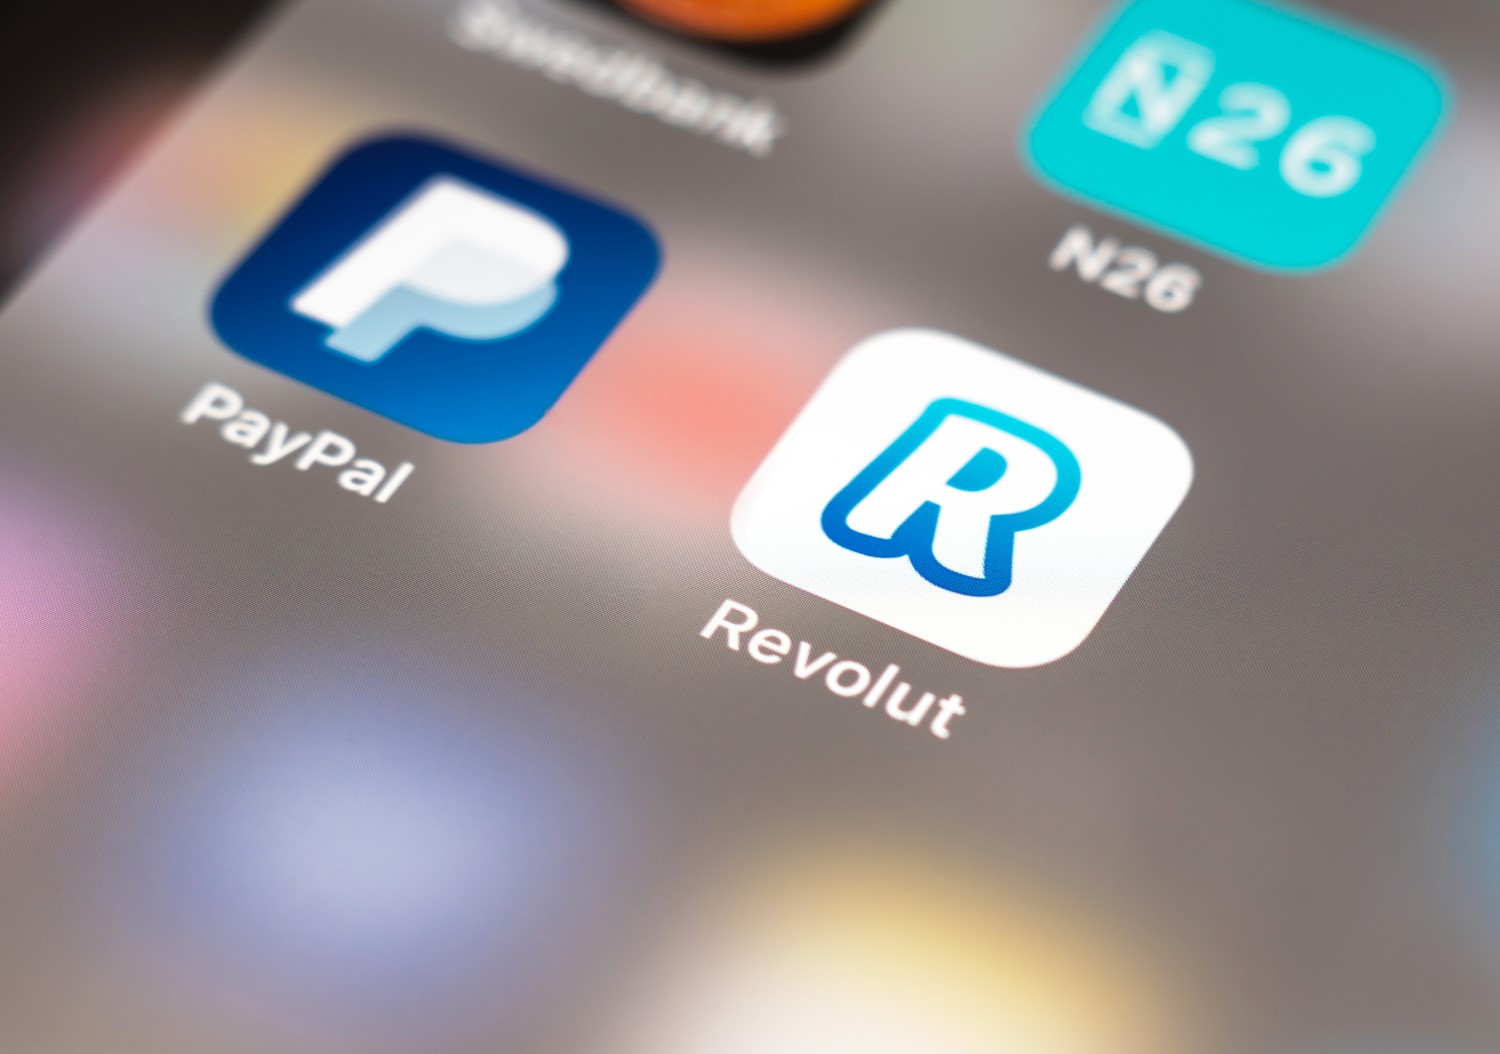 Digital-bank-revolut-expands-crypto-buying-and-selling-service-to-australia